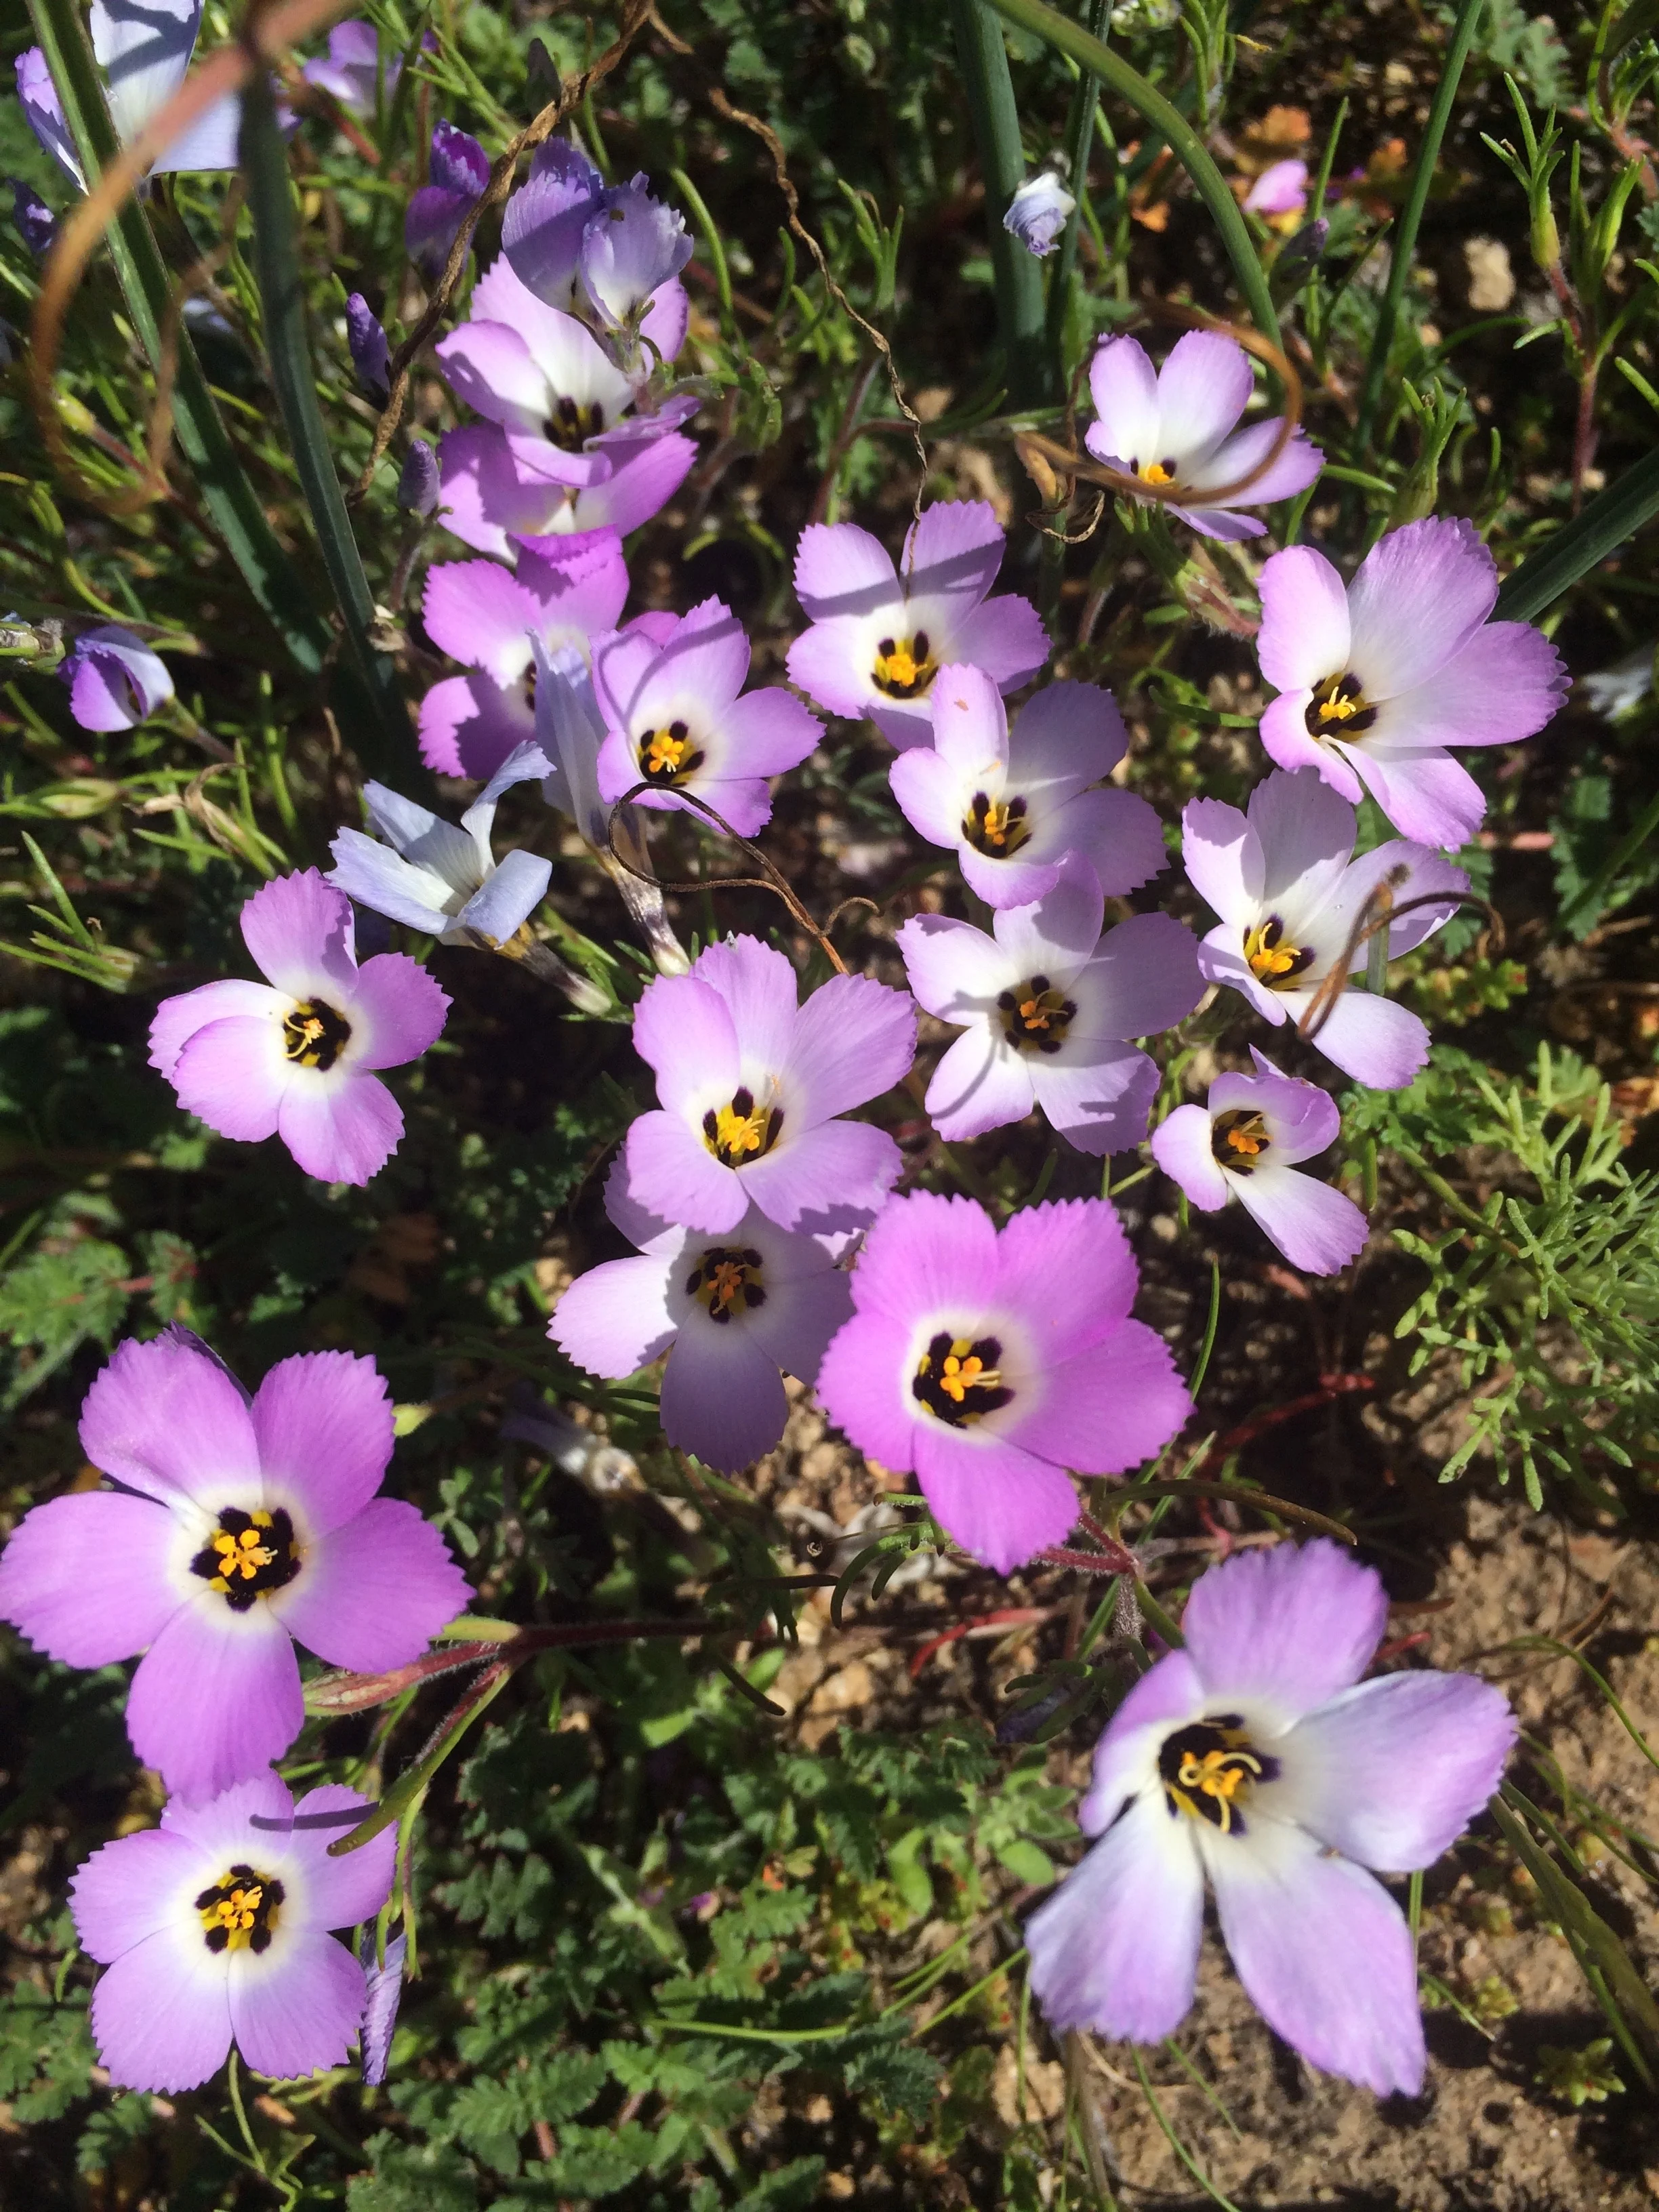 Ground pink, or Linanthus dianthiflorus, is known to bloom in higher abundance following a fire and rain. (Justin Valliere/UC Davis)